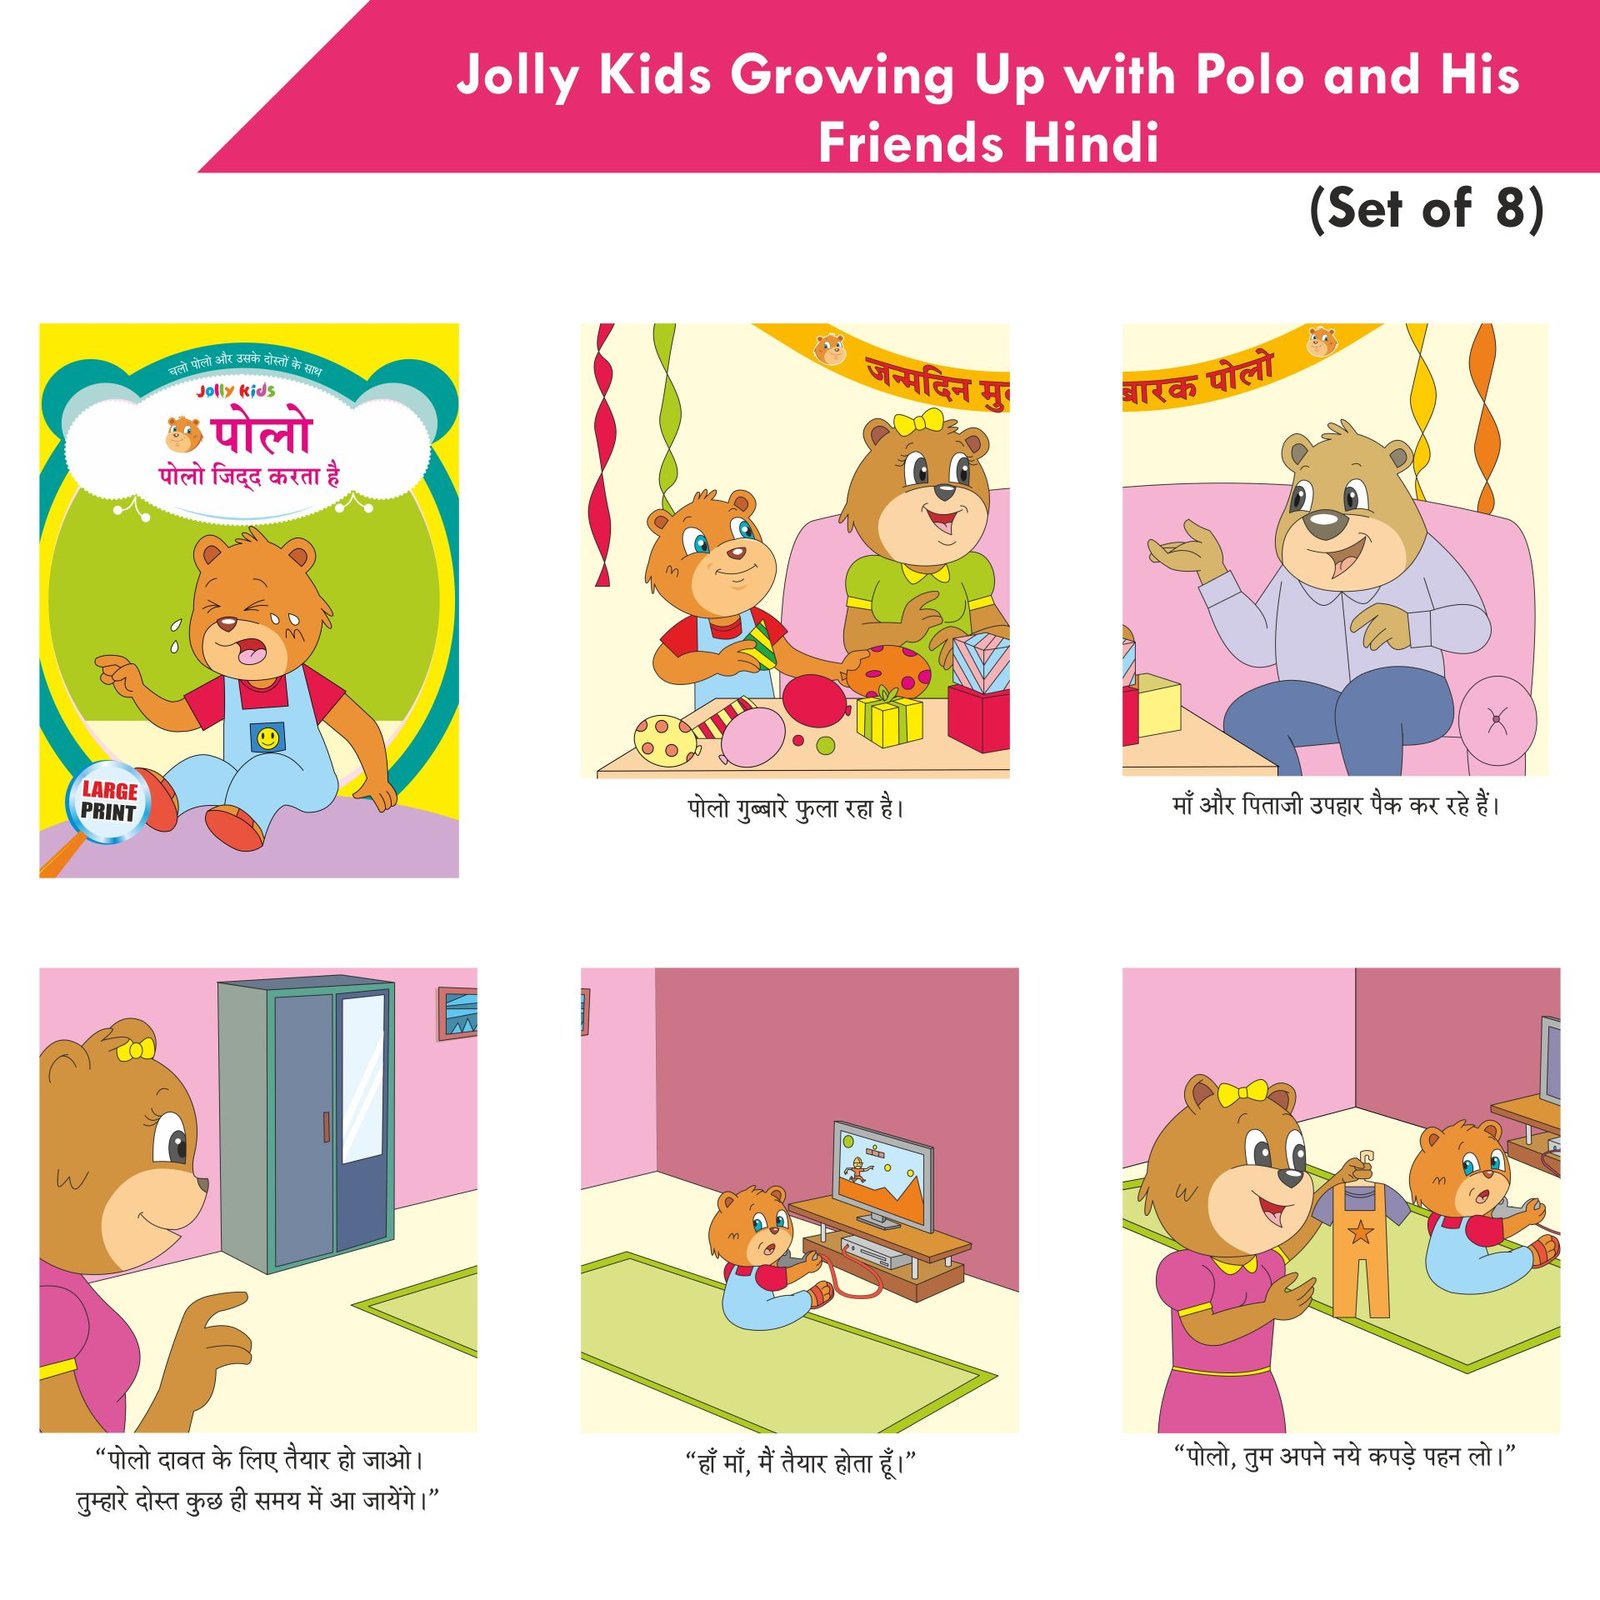 Jolly Kids Growing Up with Polo and His Friends Hindi Set of 8 9